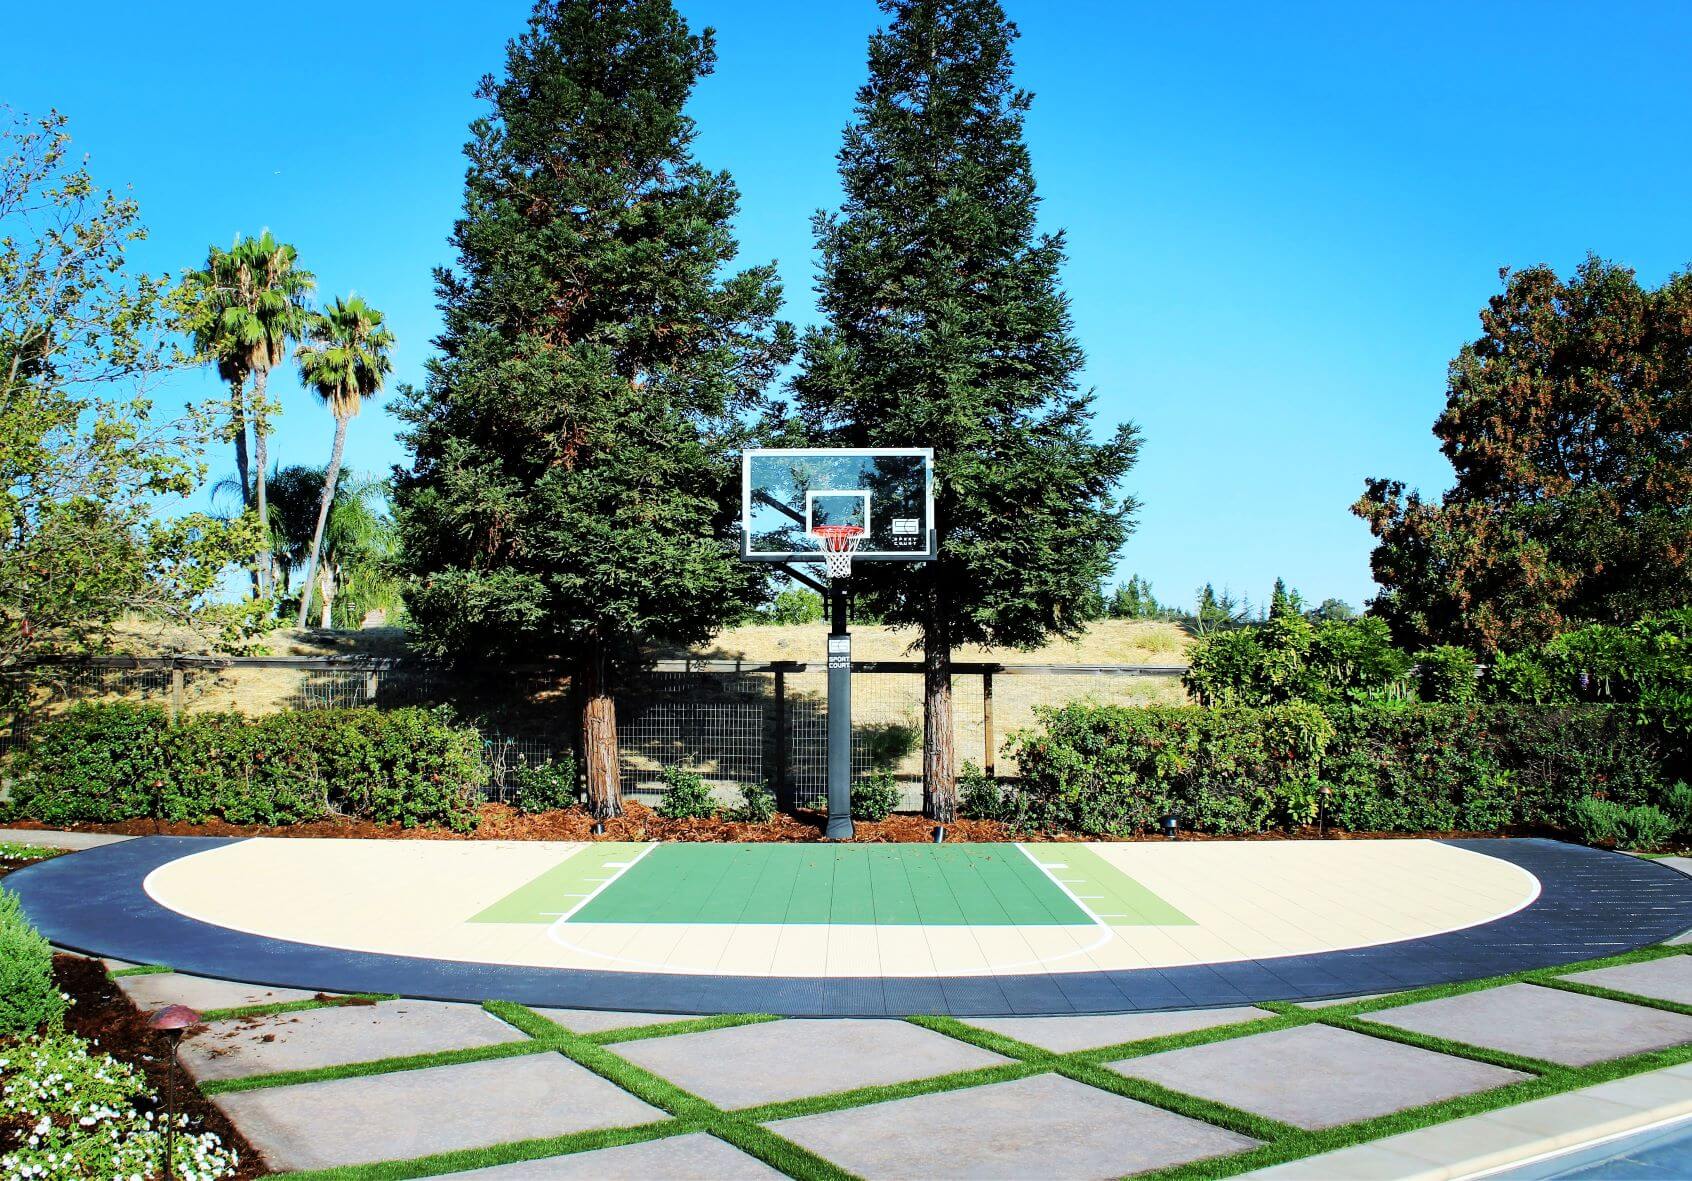 NBA Basketball Courts, Connor Sports